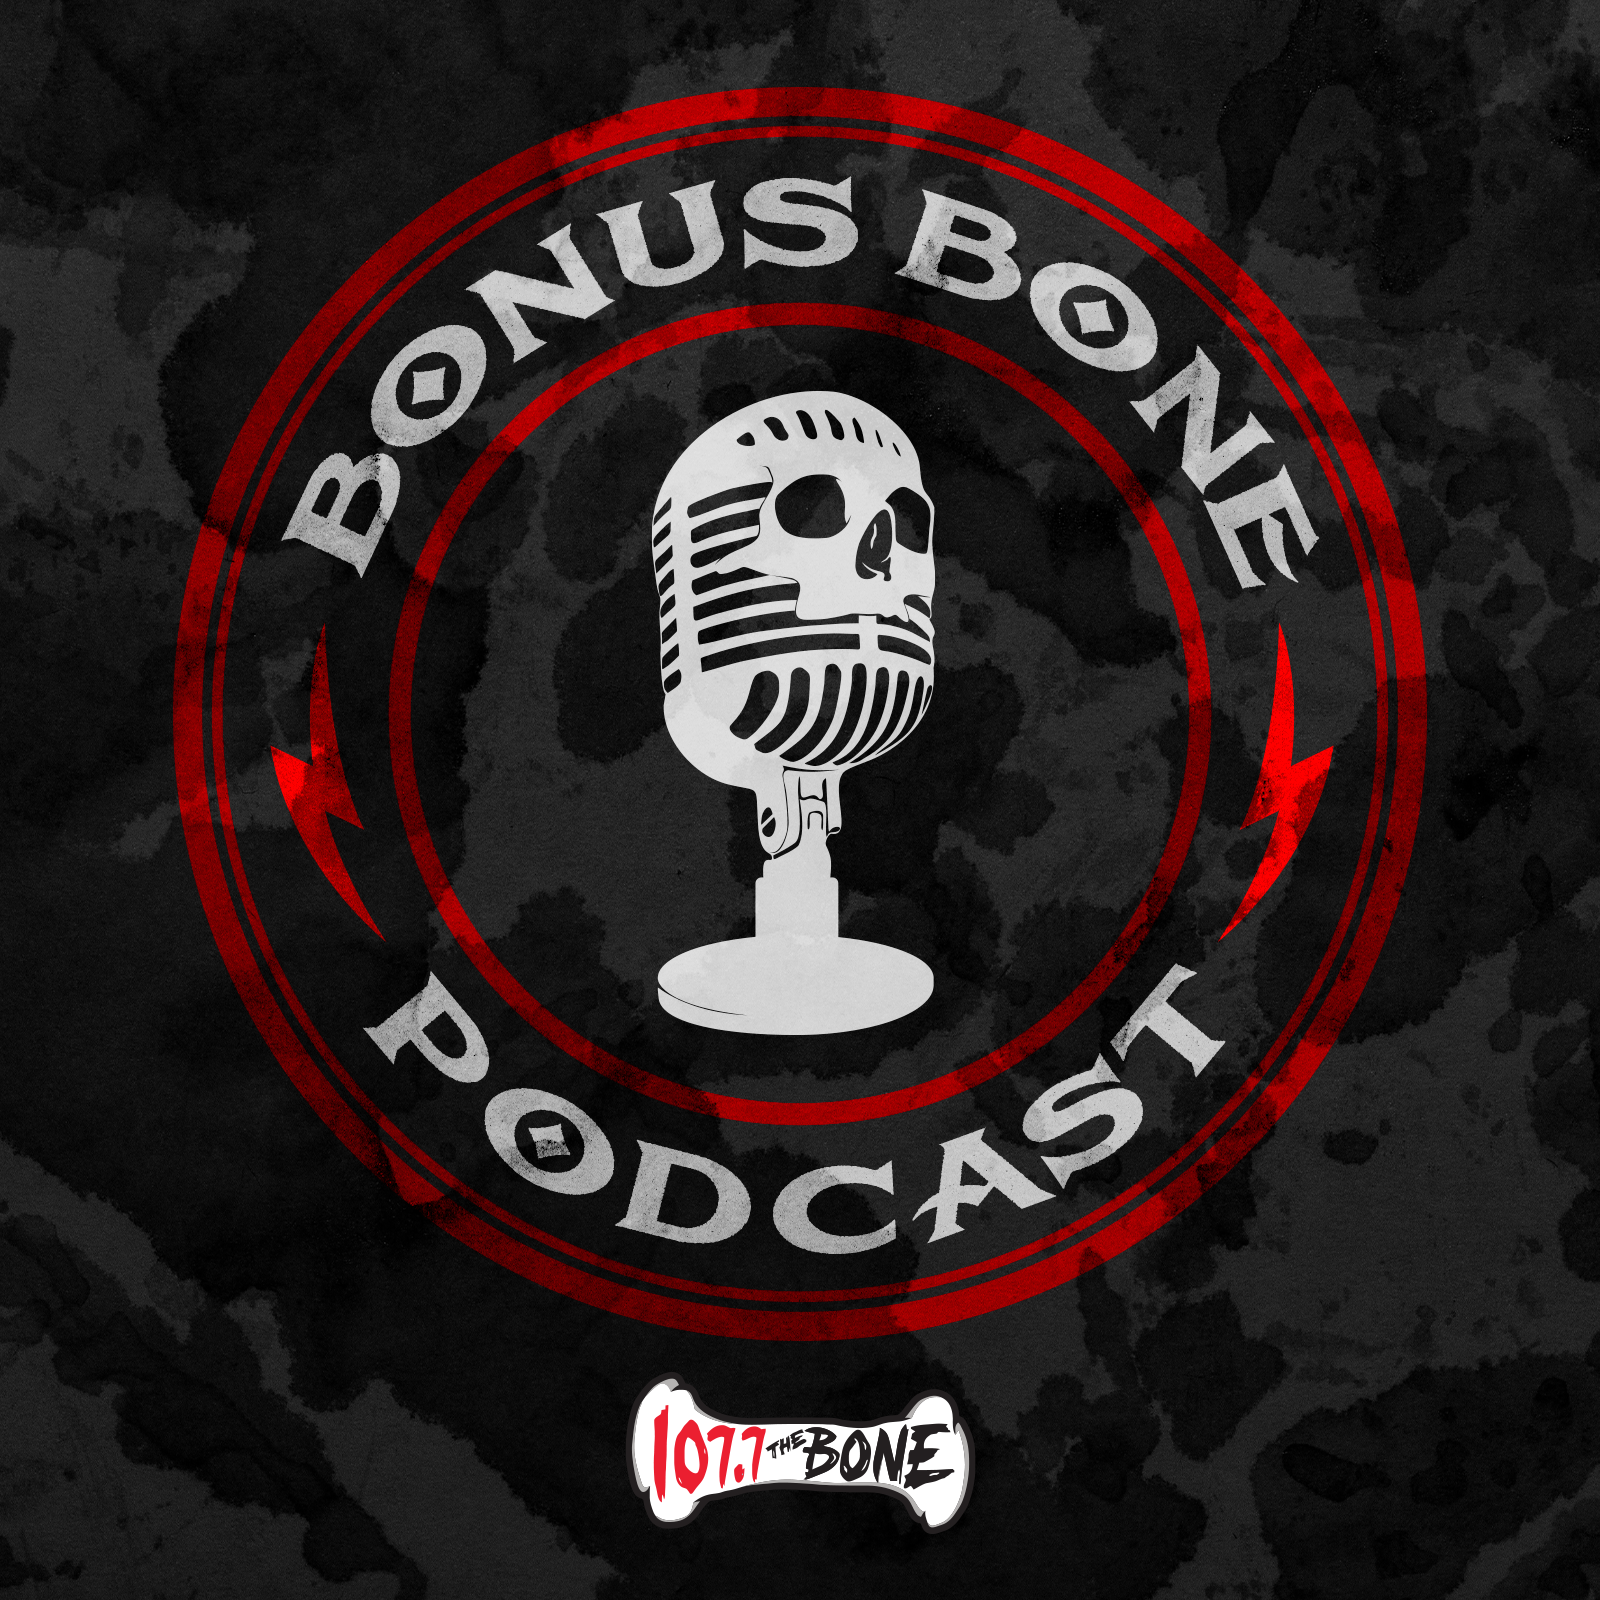 The Bonus Bone: What's The Weirdest Thing You Ever Had In Your Mouth?